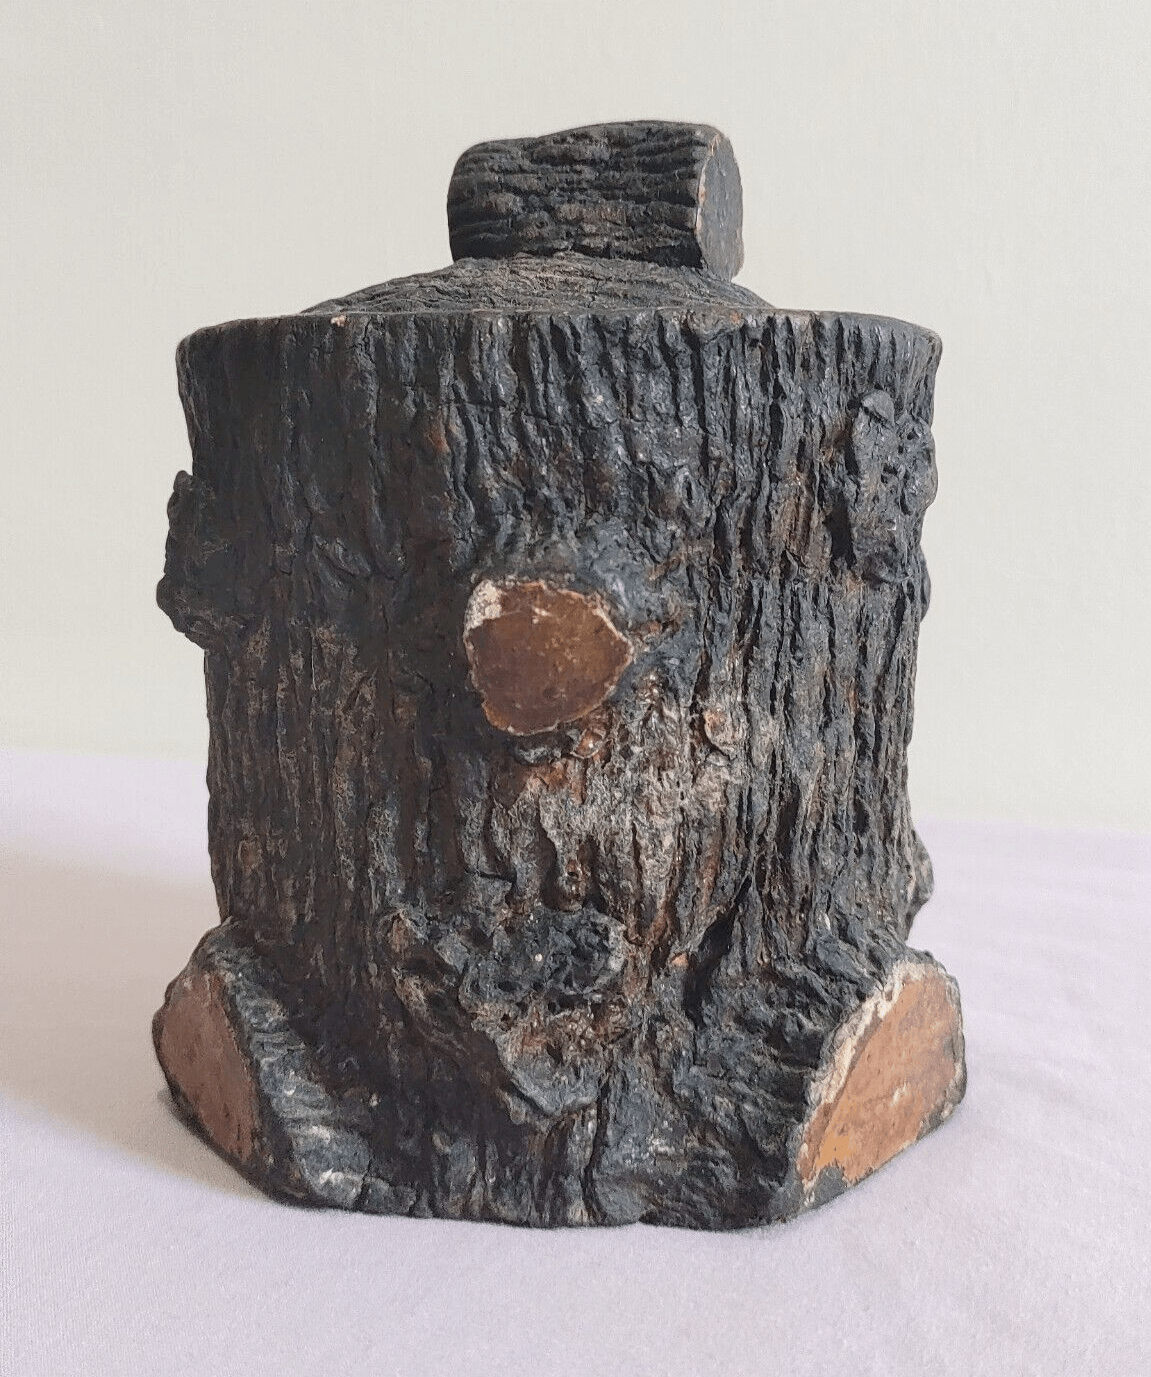 Antique Naturalistic Pottery Tree Trunk Stump Tobacco Jar Pot Black Forest Style - Tommy's Treasure